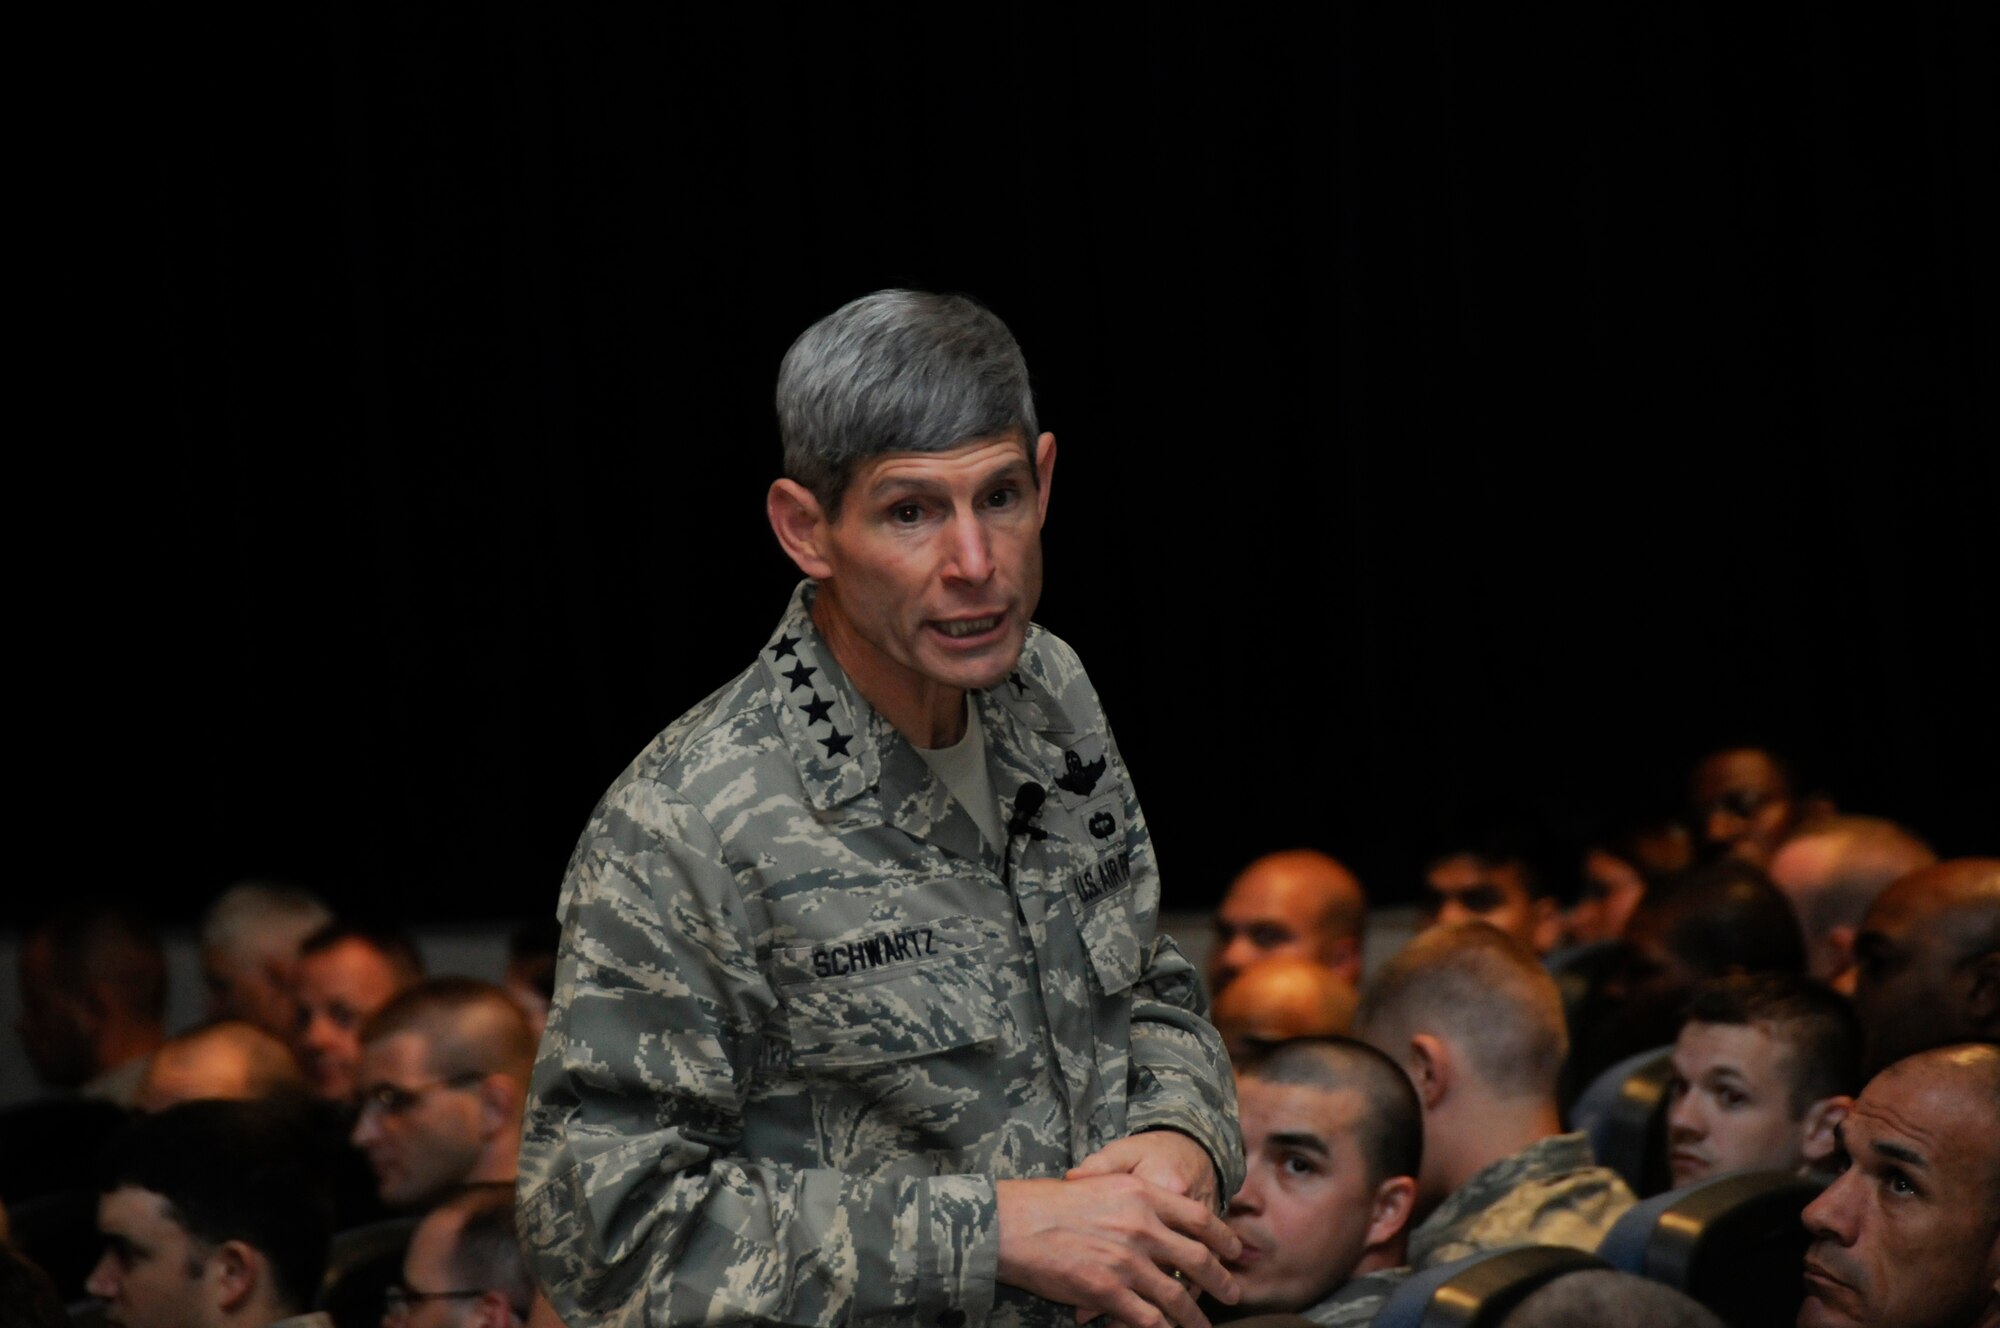 Air Force Chief of Staff Gen. Norton Schwartz speaks to an assembly of Airmen gathered from the 379th Air Expeditionary Wing Oct. 20.  The general thanked Airmen for their contributions as part of the joint team supporting the Global War on Terror.   The visit marked the CSAF's first trip to the U.S. Air Forces Central area of responsibility since his appointment as the Air Force chief of staff. (U.S. Air Force photo by Tech. Sgt. Michael Boquette/Released)